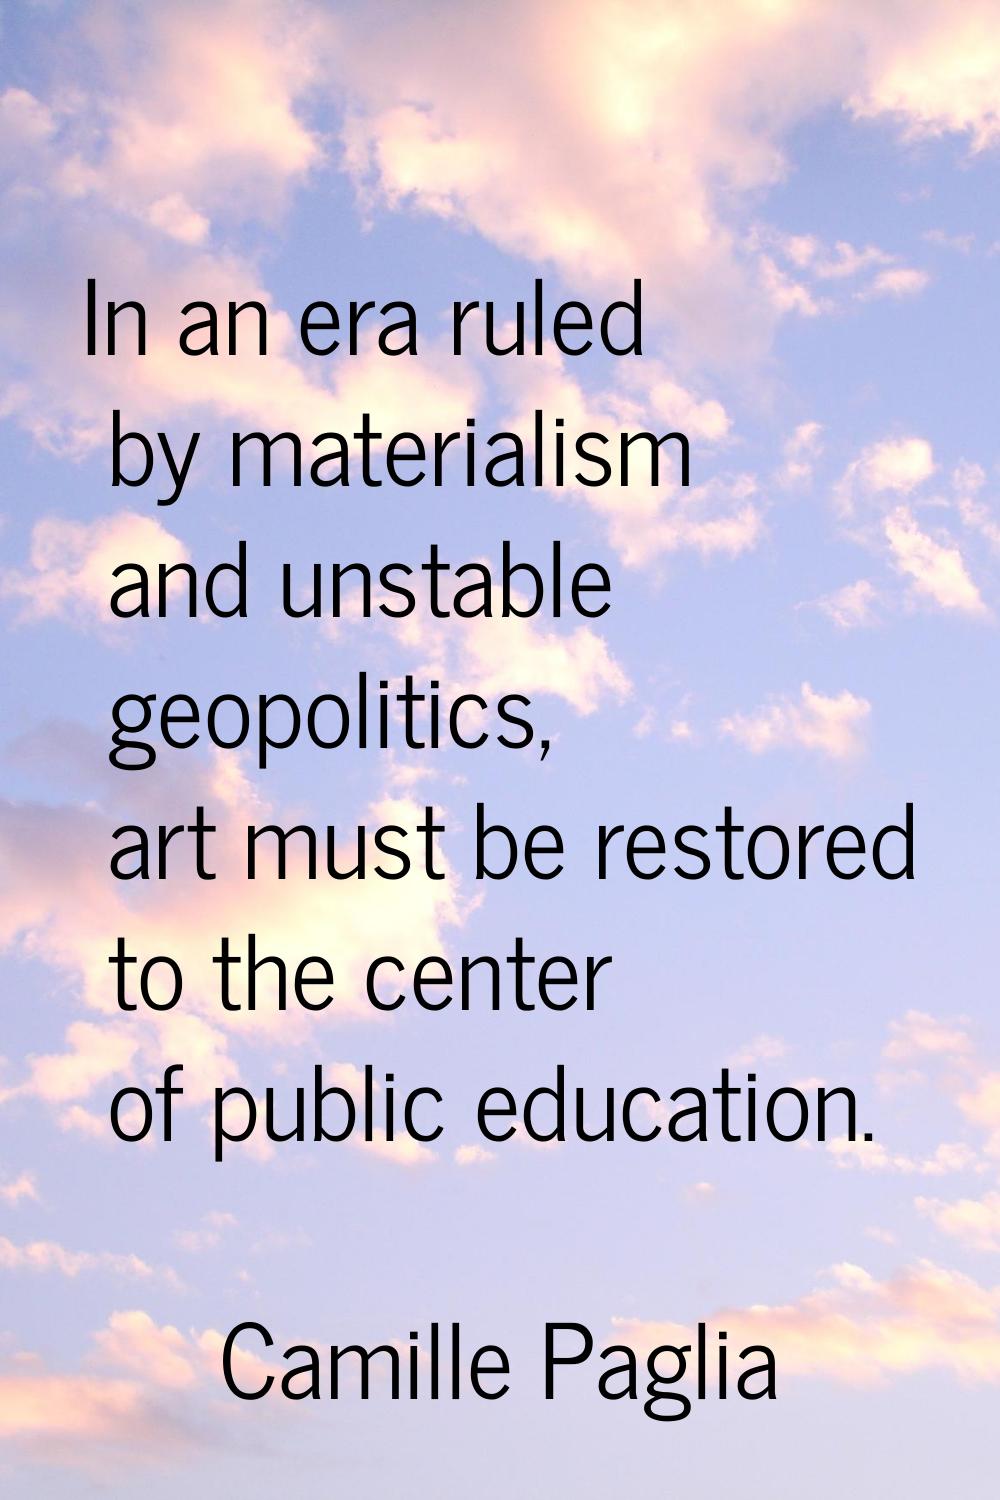 In an era ruled by materialism and unstable geopolitics, art must be restored to the center of publ